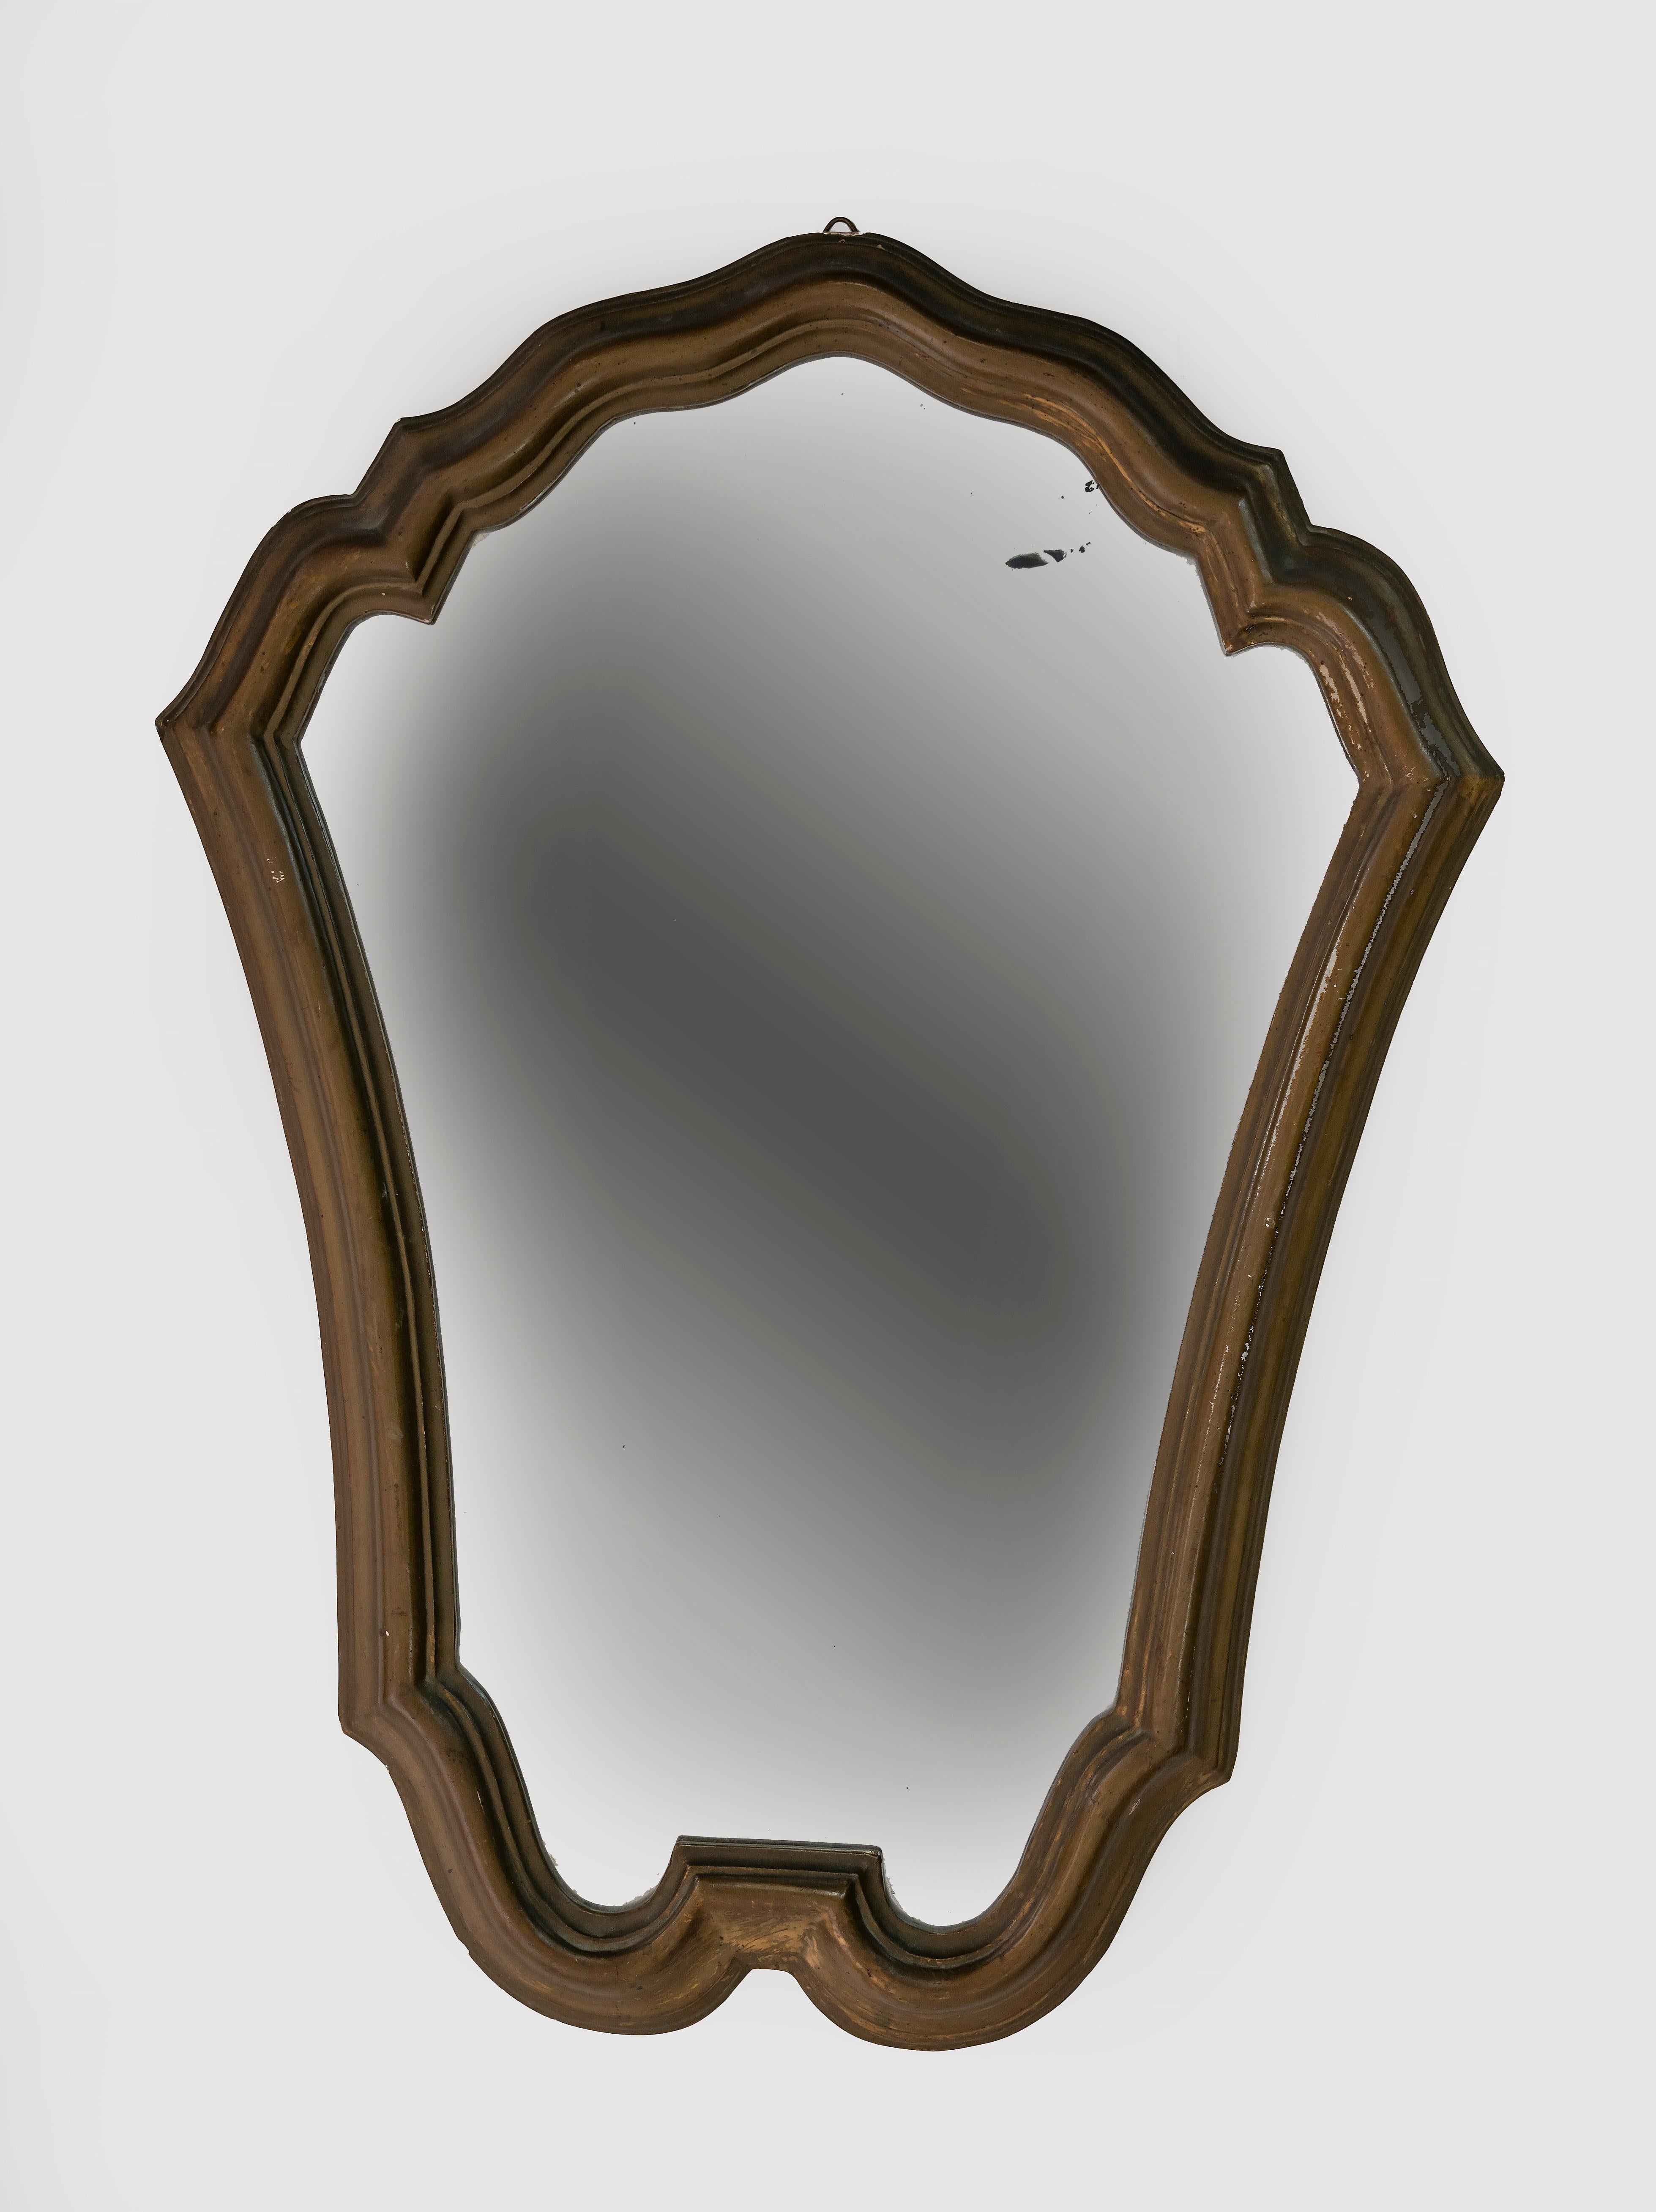 Vintage Mirror is an original design object realized in the early 20th Century in Italy.

Good conditions except for some loss of minor losses of the wood and stains on mirror glass.

Give a touch of elegance to your room with this amazing